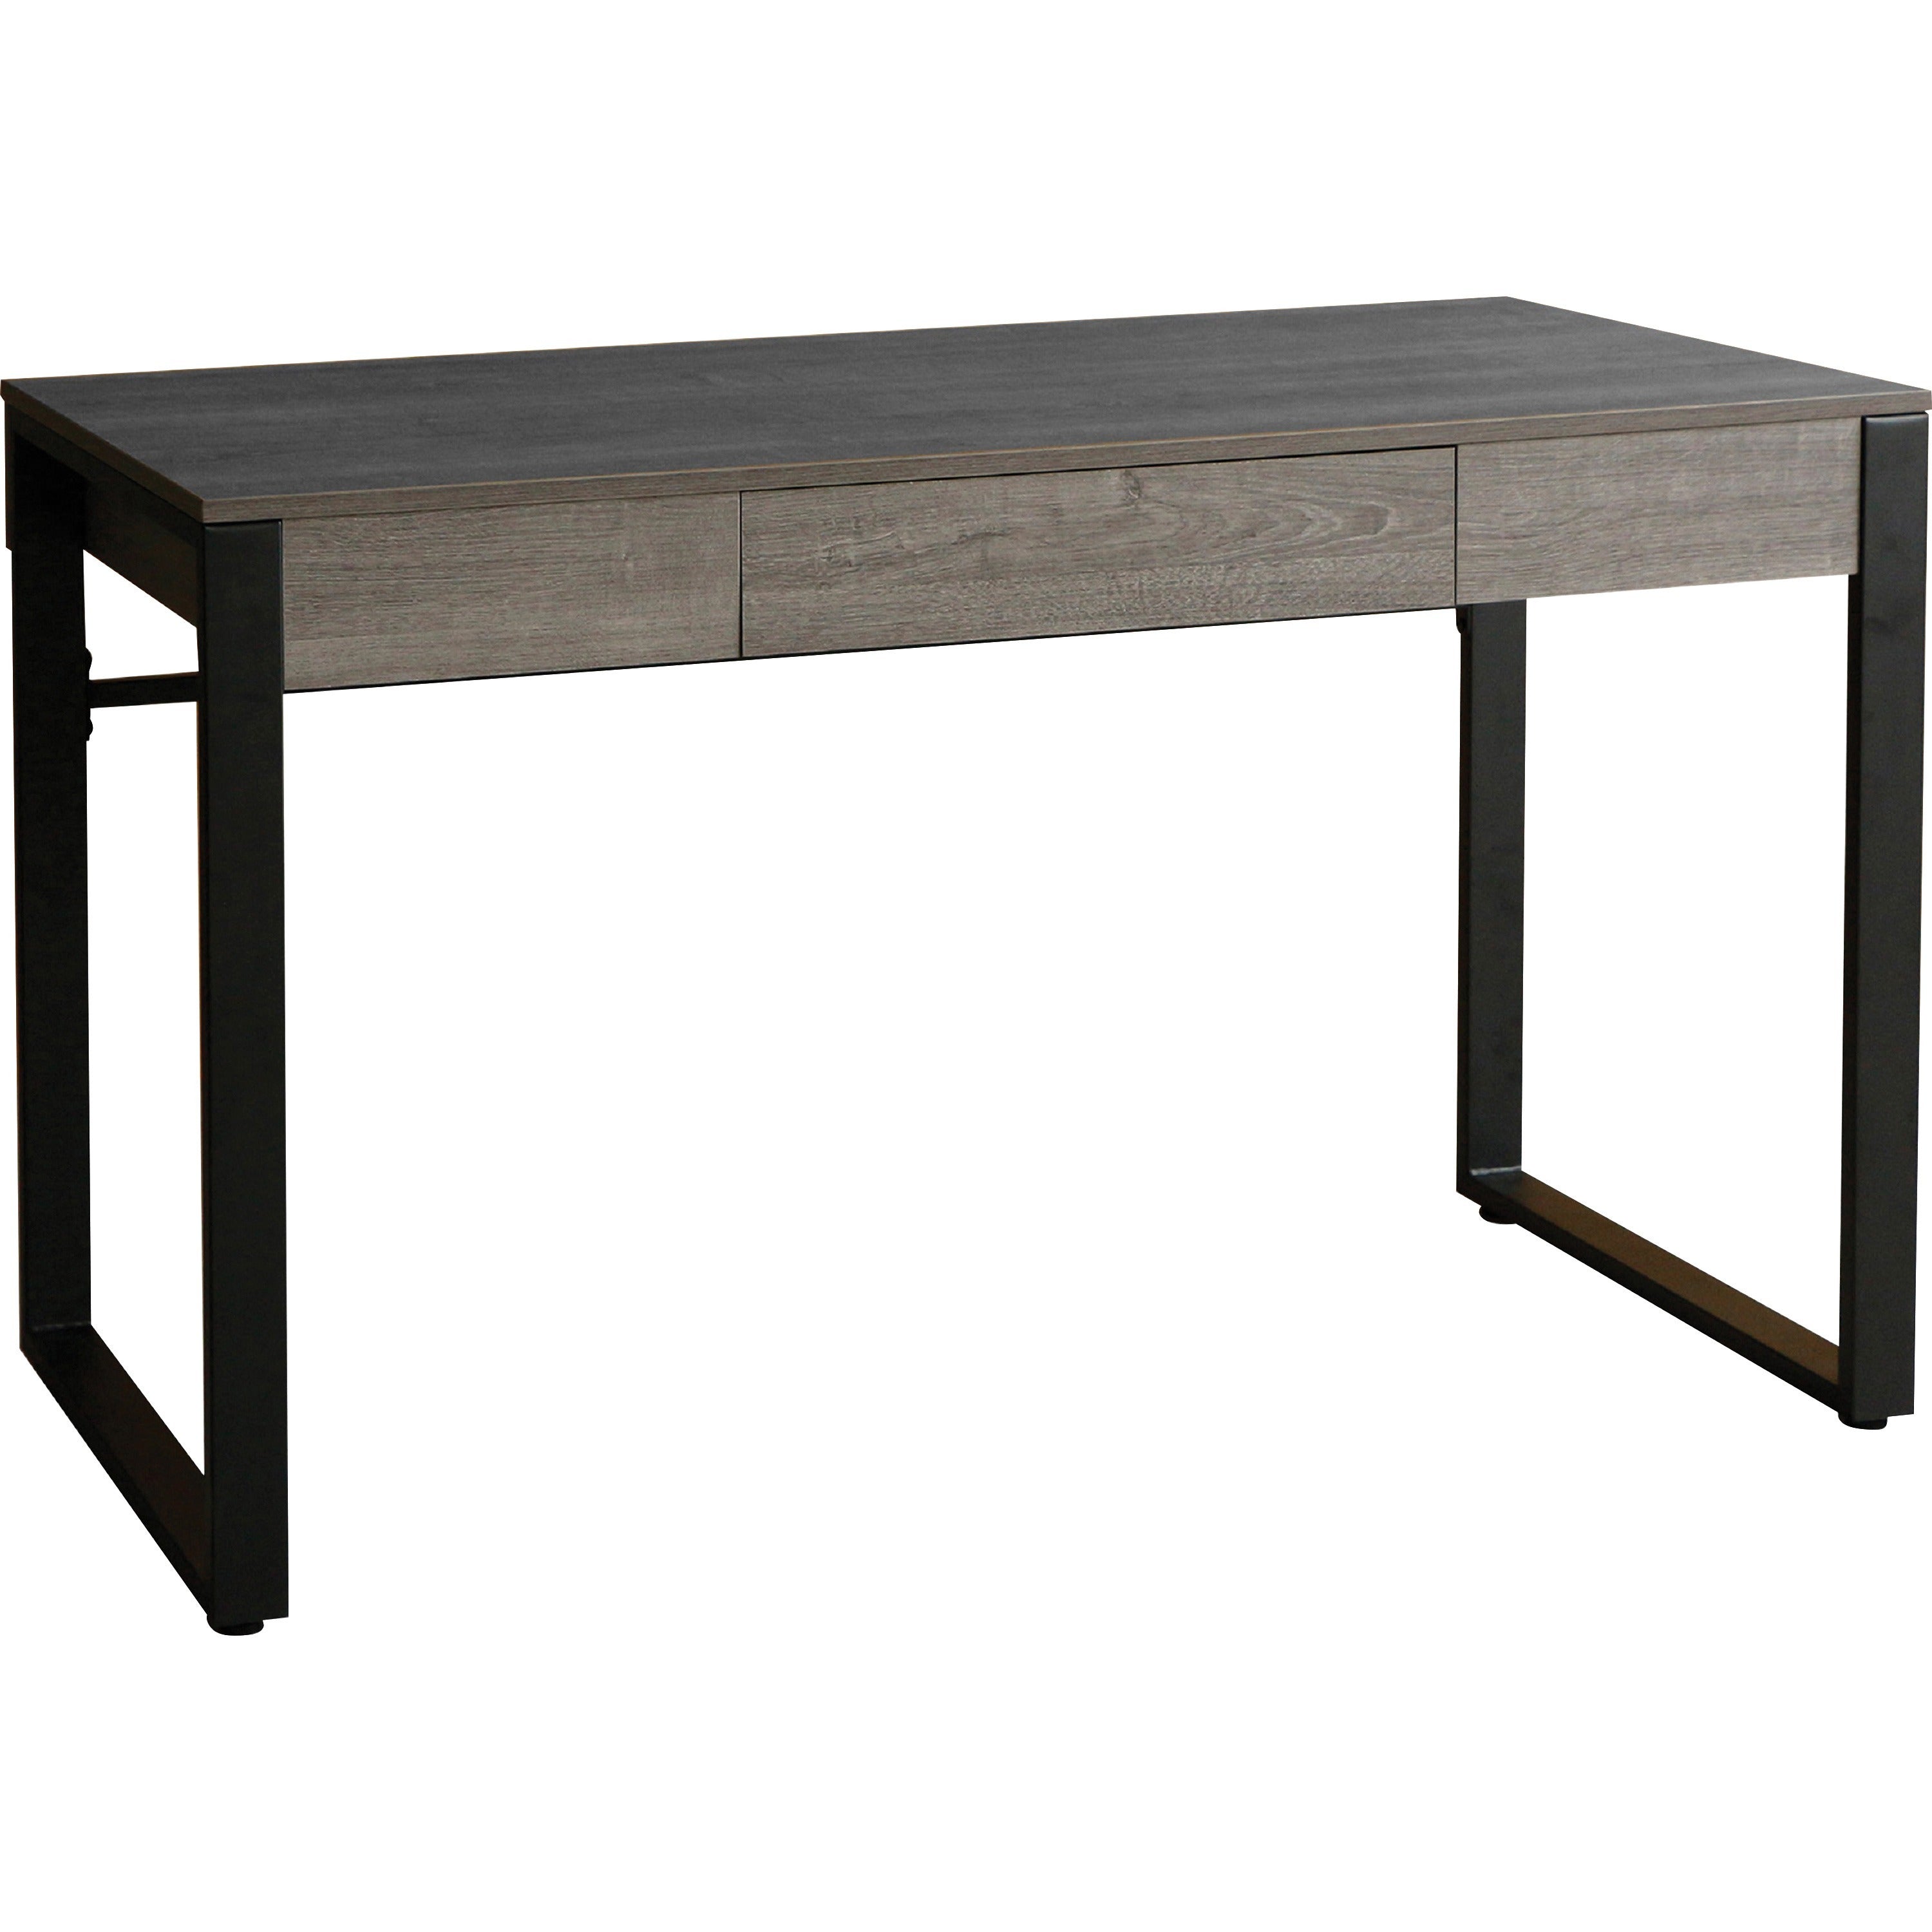 lorell-soho-desk-with-center-drawer-47-x-23530-1-drawers-band-edge-finish-charcoal_llr97618 - 1